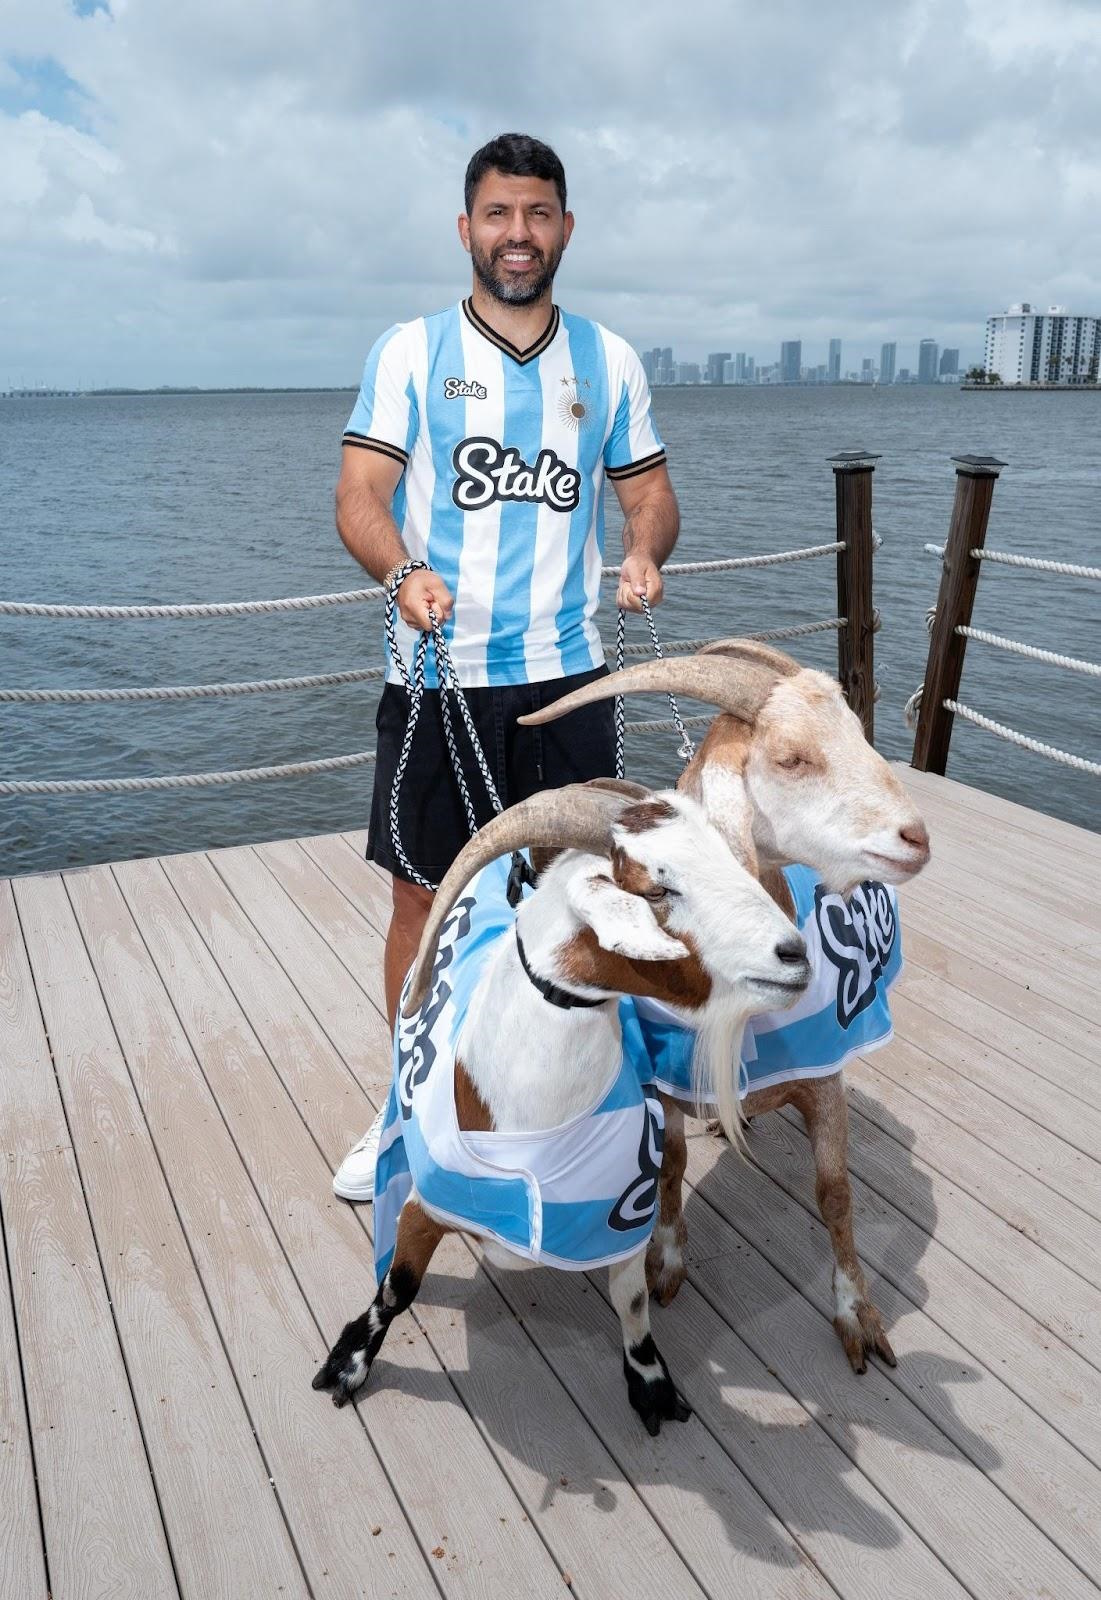 the-goats-have-arrived:-stake-pulls-off-ambitious-marketing-stunt-as-sergio-aguero-welcomes-world-champions-to-miami